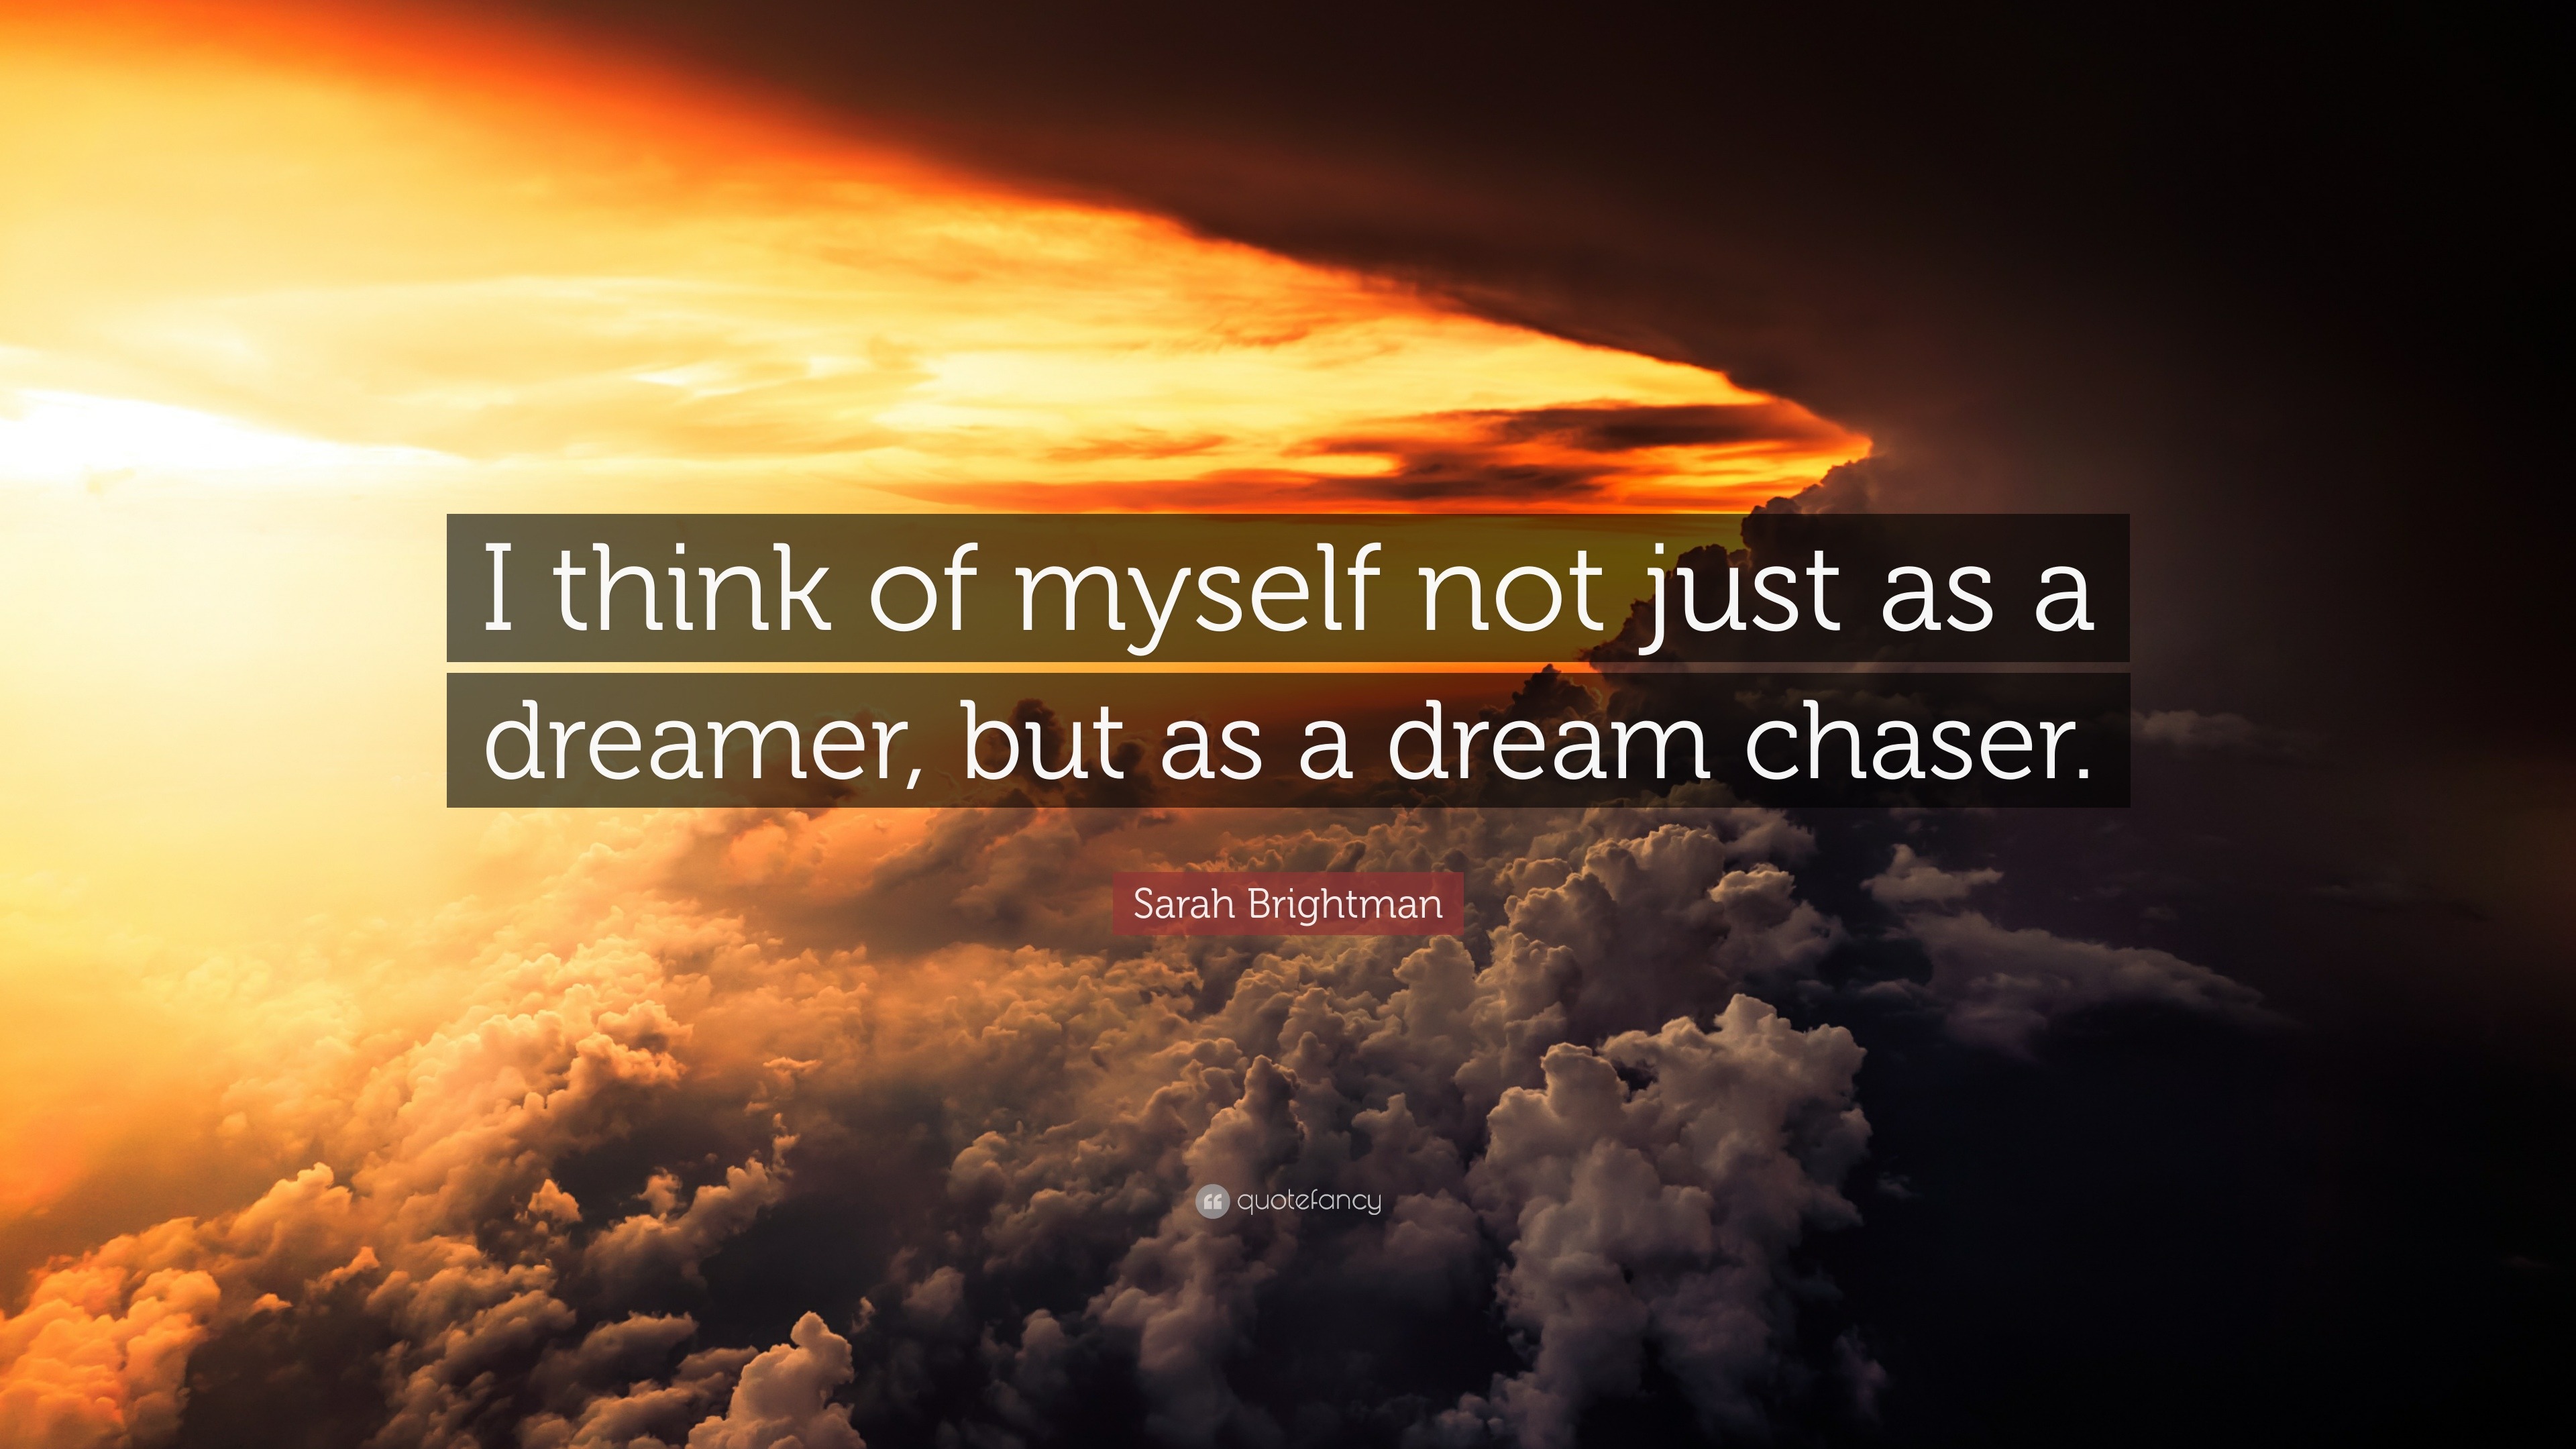 Sarah Brightman Quote: “I think of myself not just as a dreamer, but as ...
